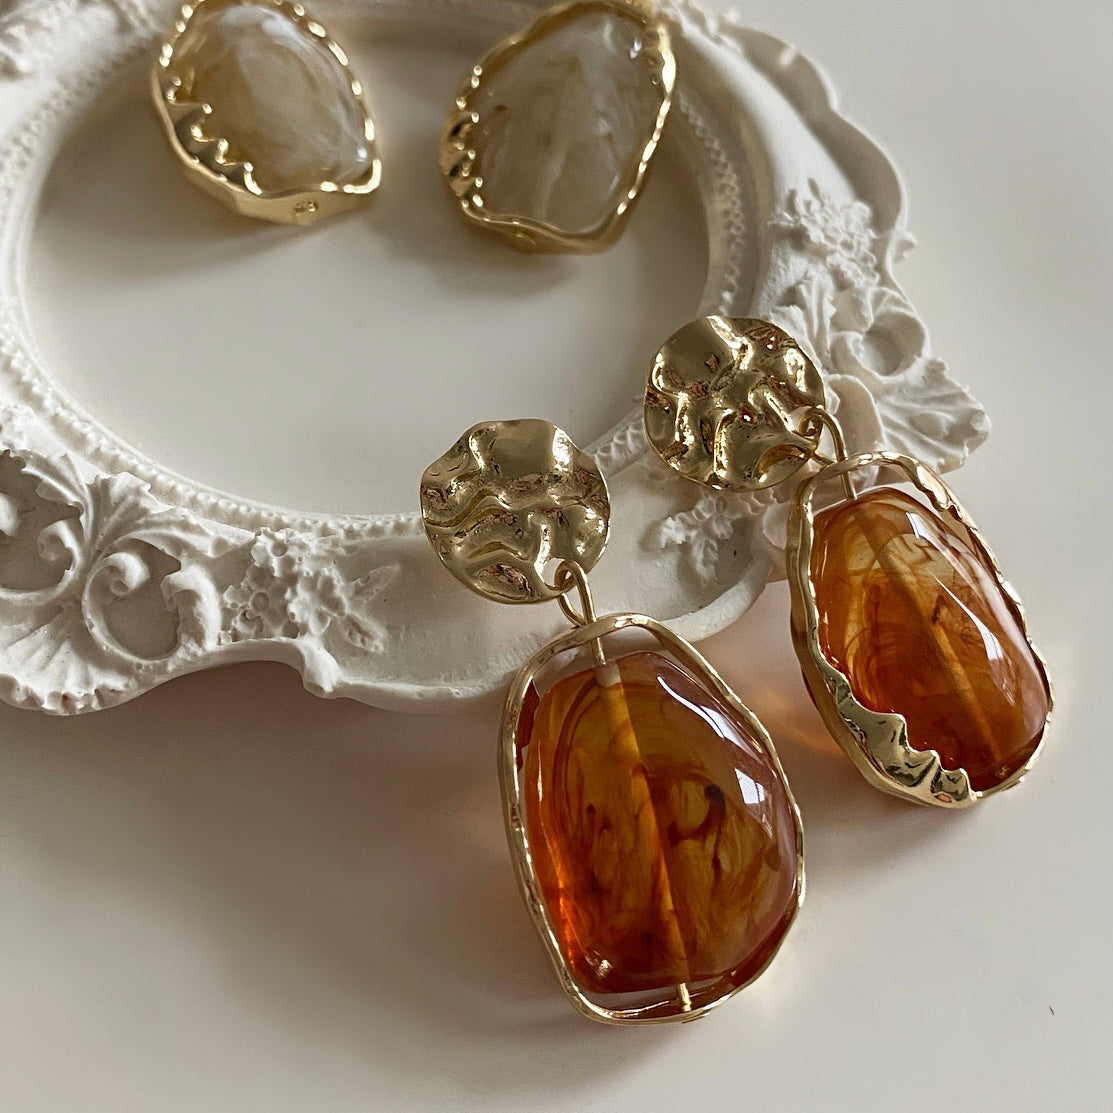 These Agate Earrings are a stylish accessory to add a touch of fashion to any outfit. The earrings are inspired by the beautiful agate stone, making them both elegant and sophisticated.